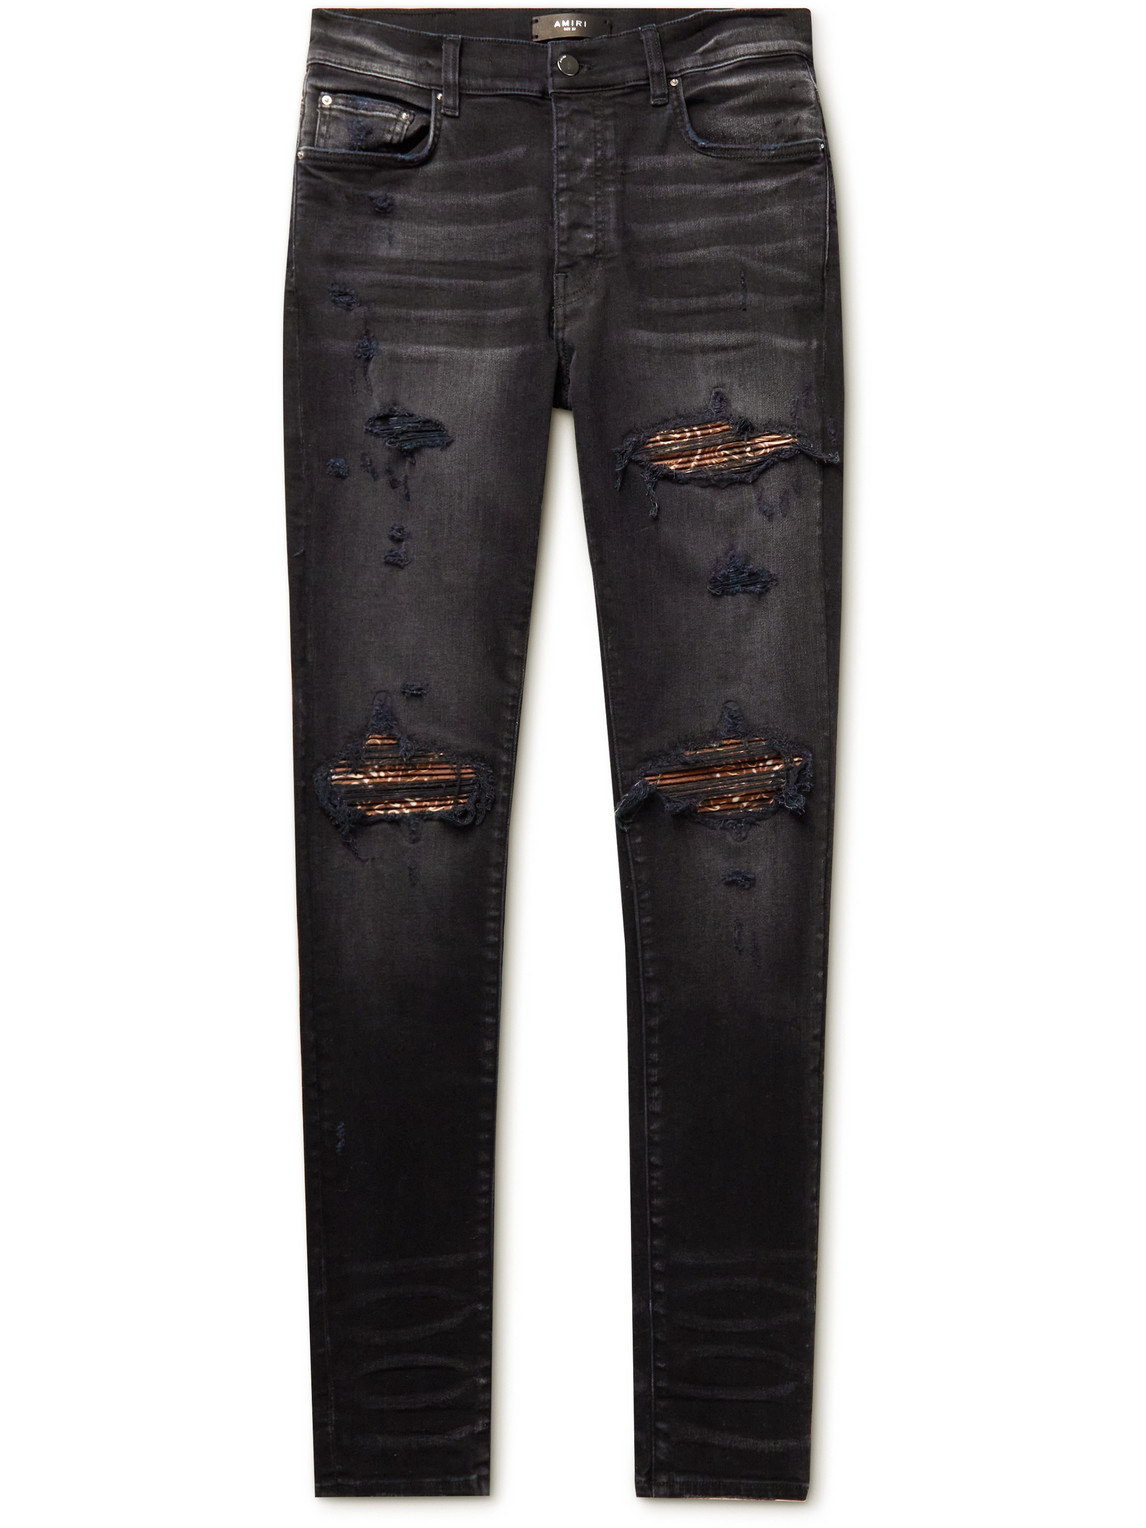 MX1 Skinny-Fit Panelled Distressed Jeans